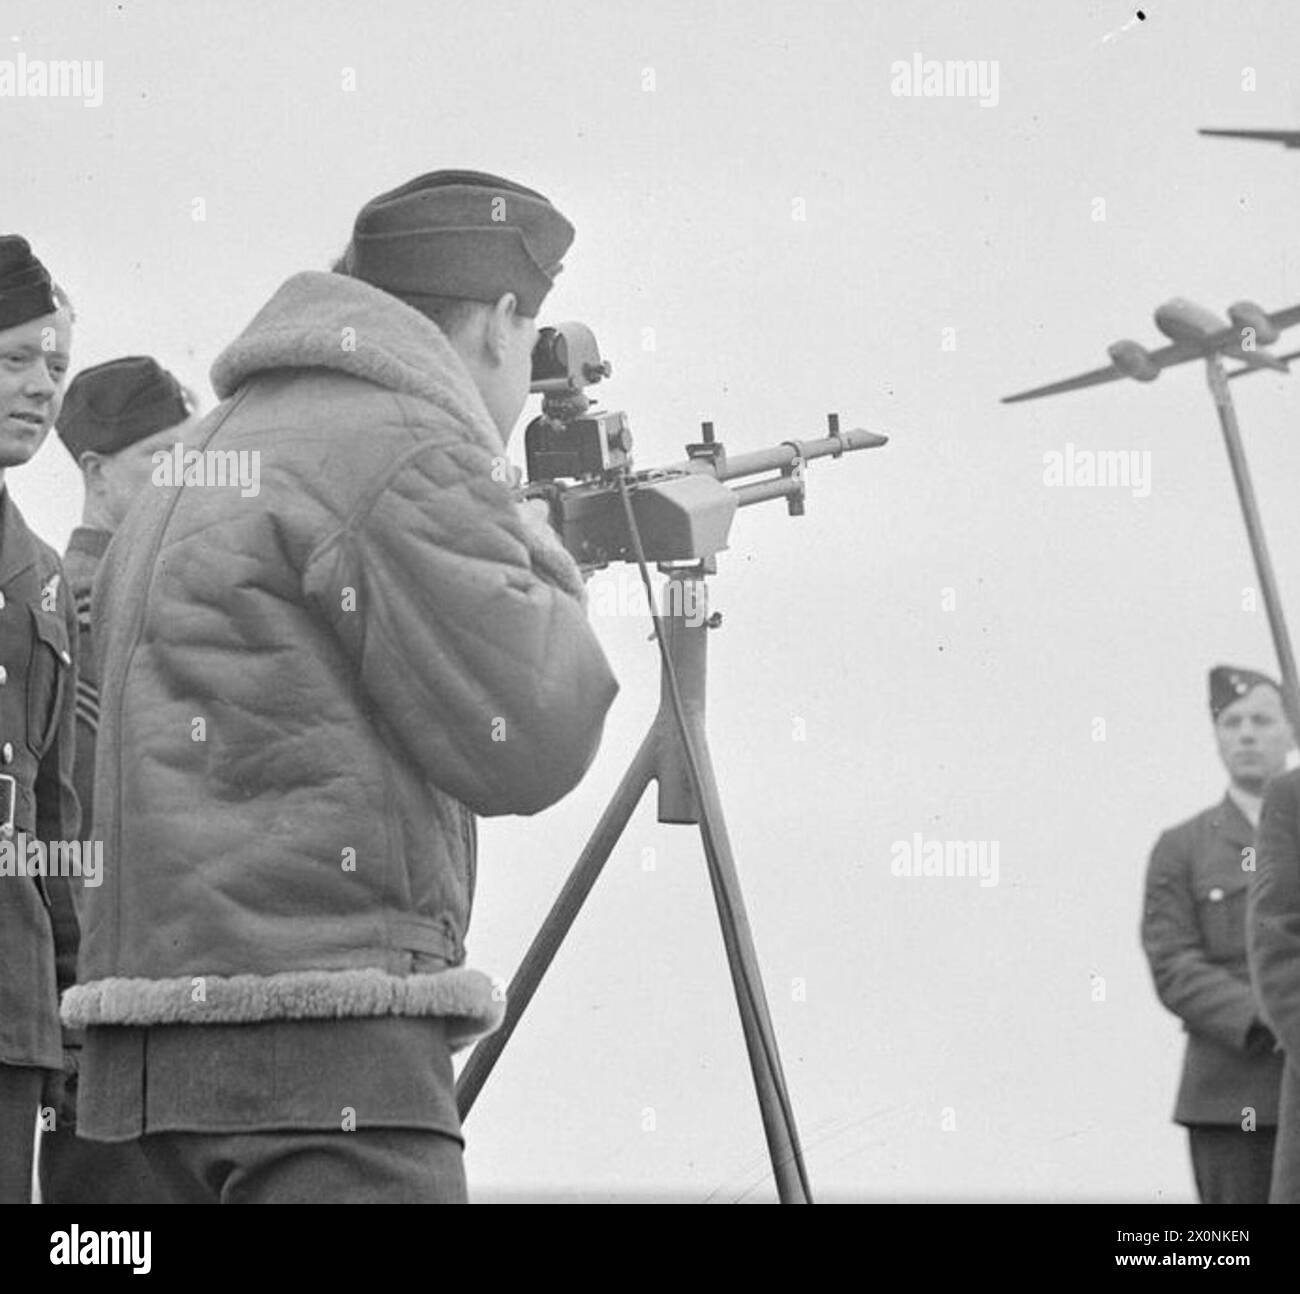 ROYAL AIR FORCE ARMY C-OPERATION COMMAND, 1940-1943. - Air gunners of No. 400 Squadron RCAF being trained in aircraft recognition and judging the distances of enemy aircraft by means of scale models, at Odiham, Hampshire Royal Canadian Air Force, 400 Squadron Stock Photo